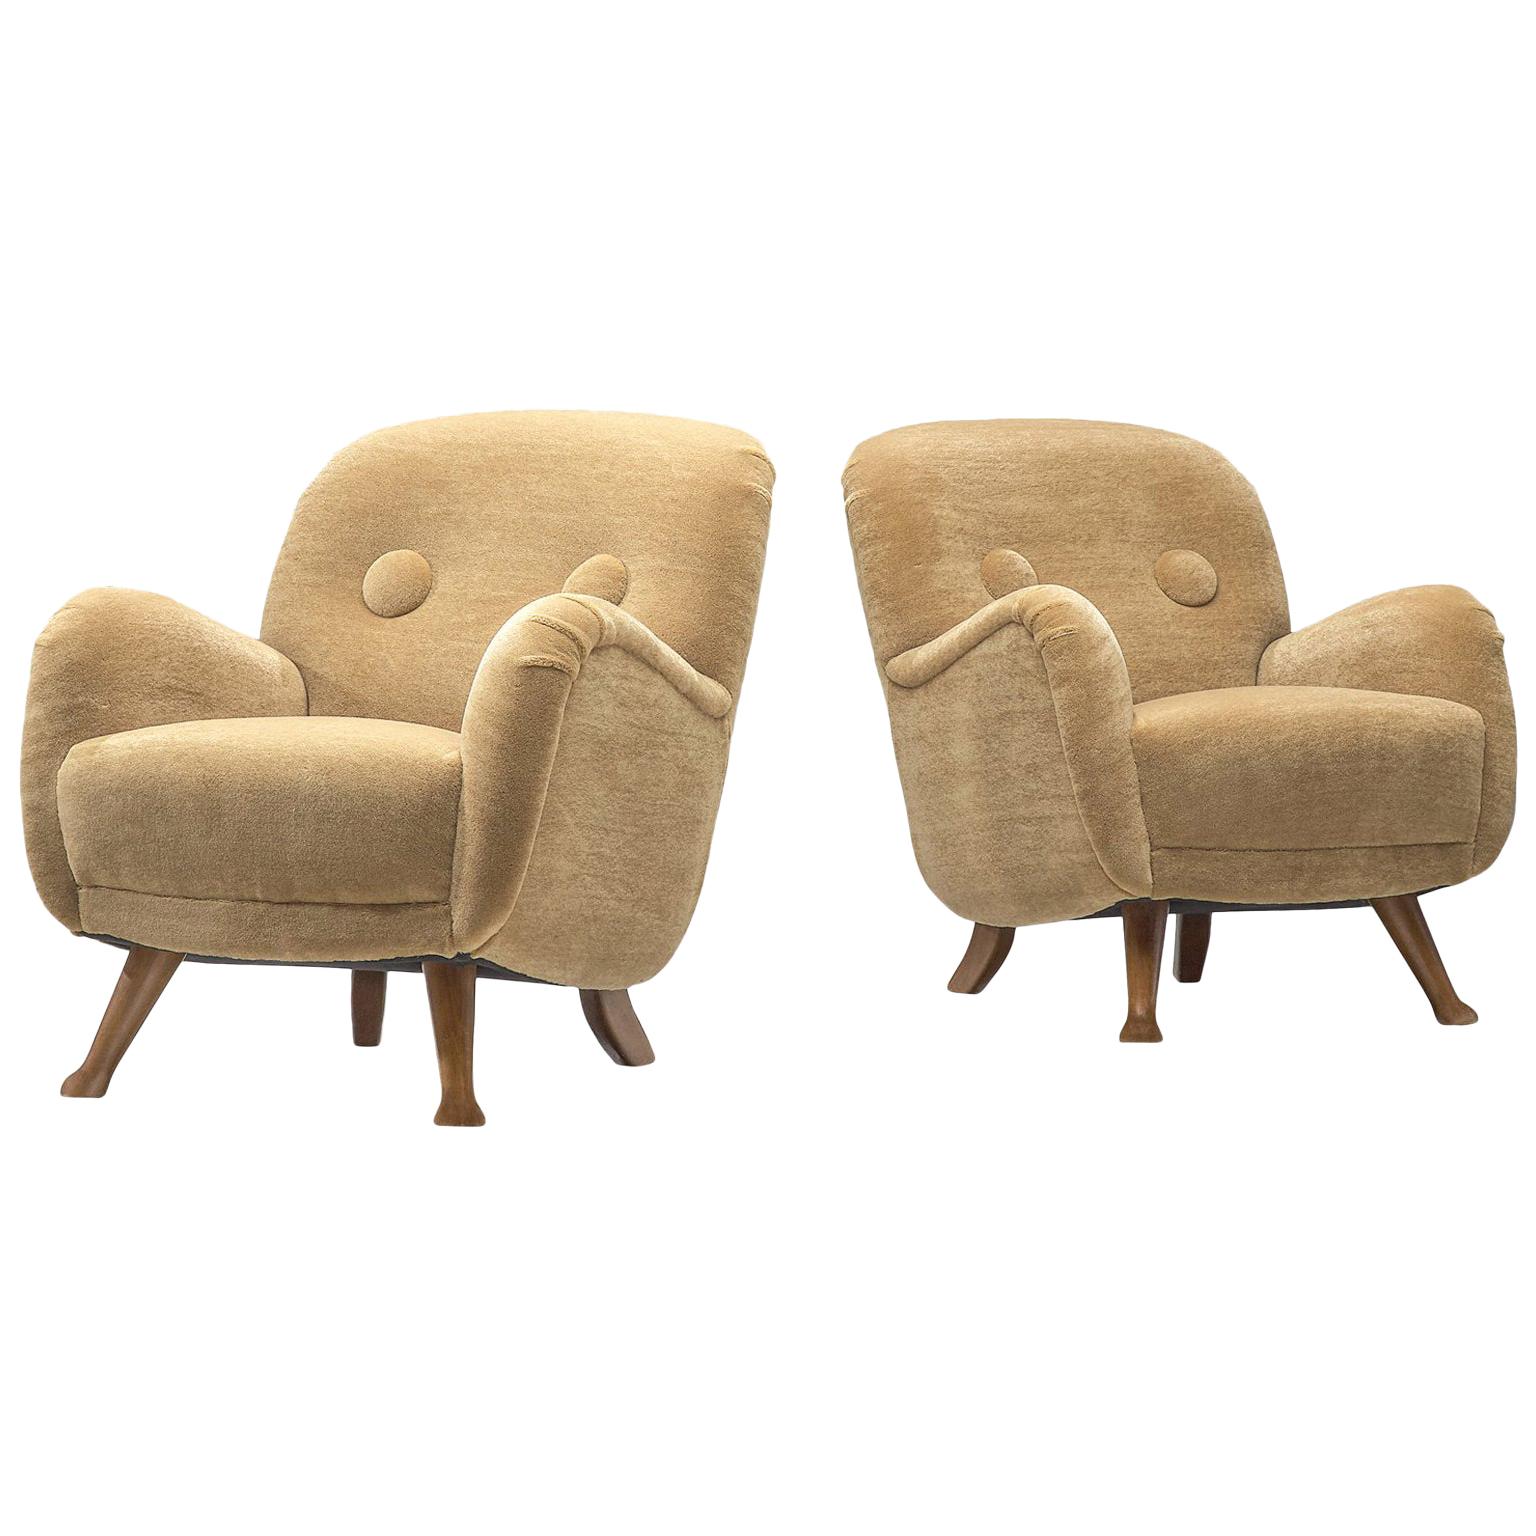 Berga Mobler Reupholstered Lounge Chairs in Beige Teddy